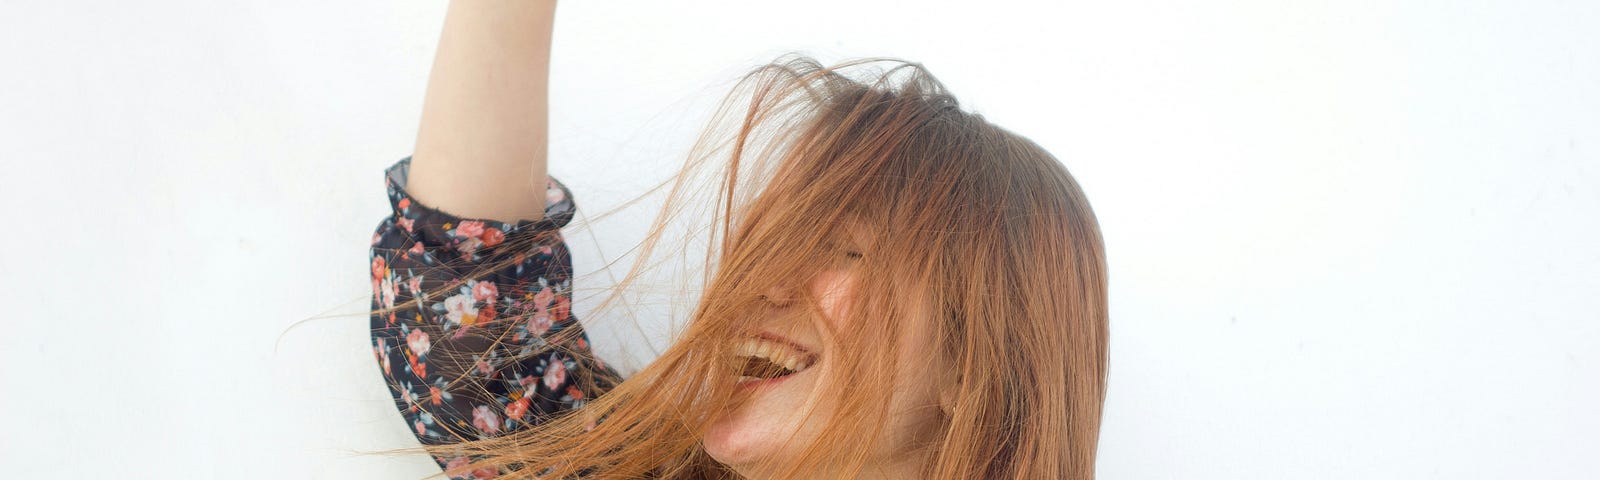 A woman with long, red hair smiles gleefully. One hand is raised in the air as her hair blows in the wind. She appears to be carefree.